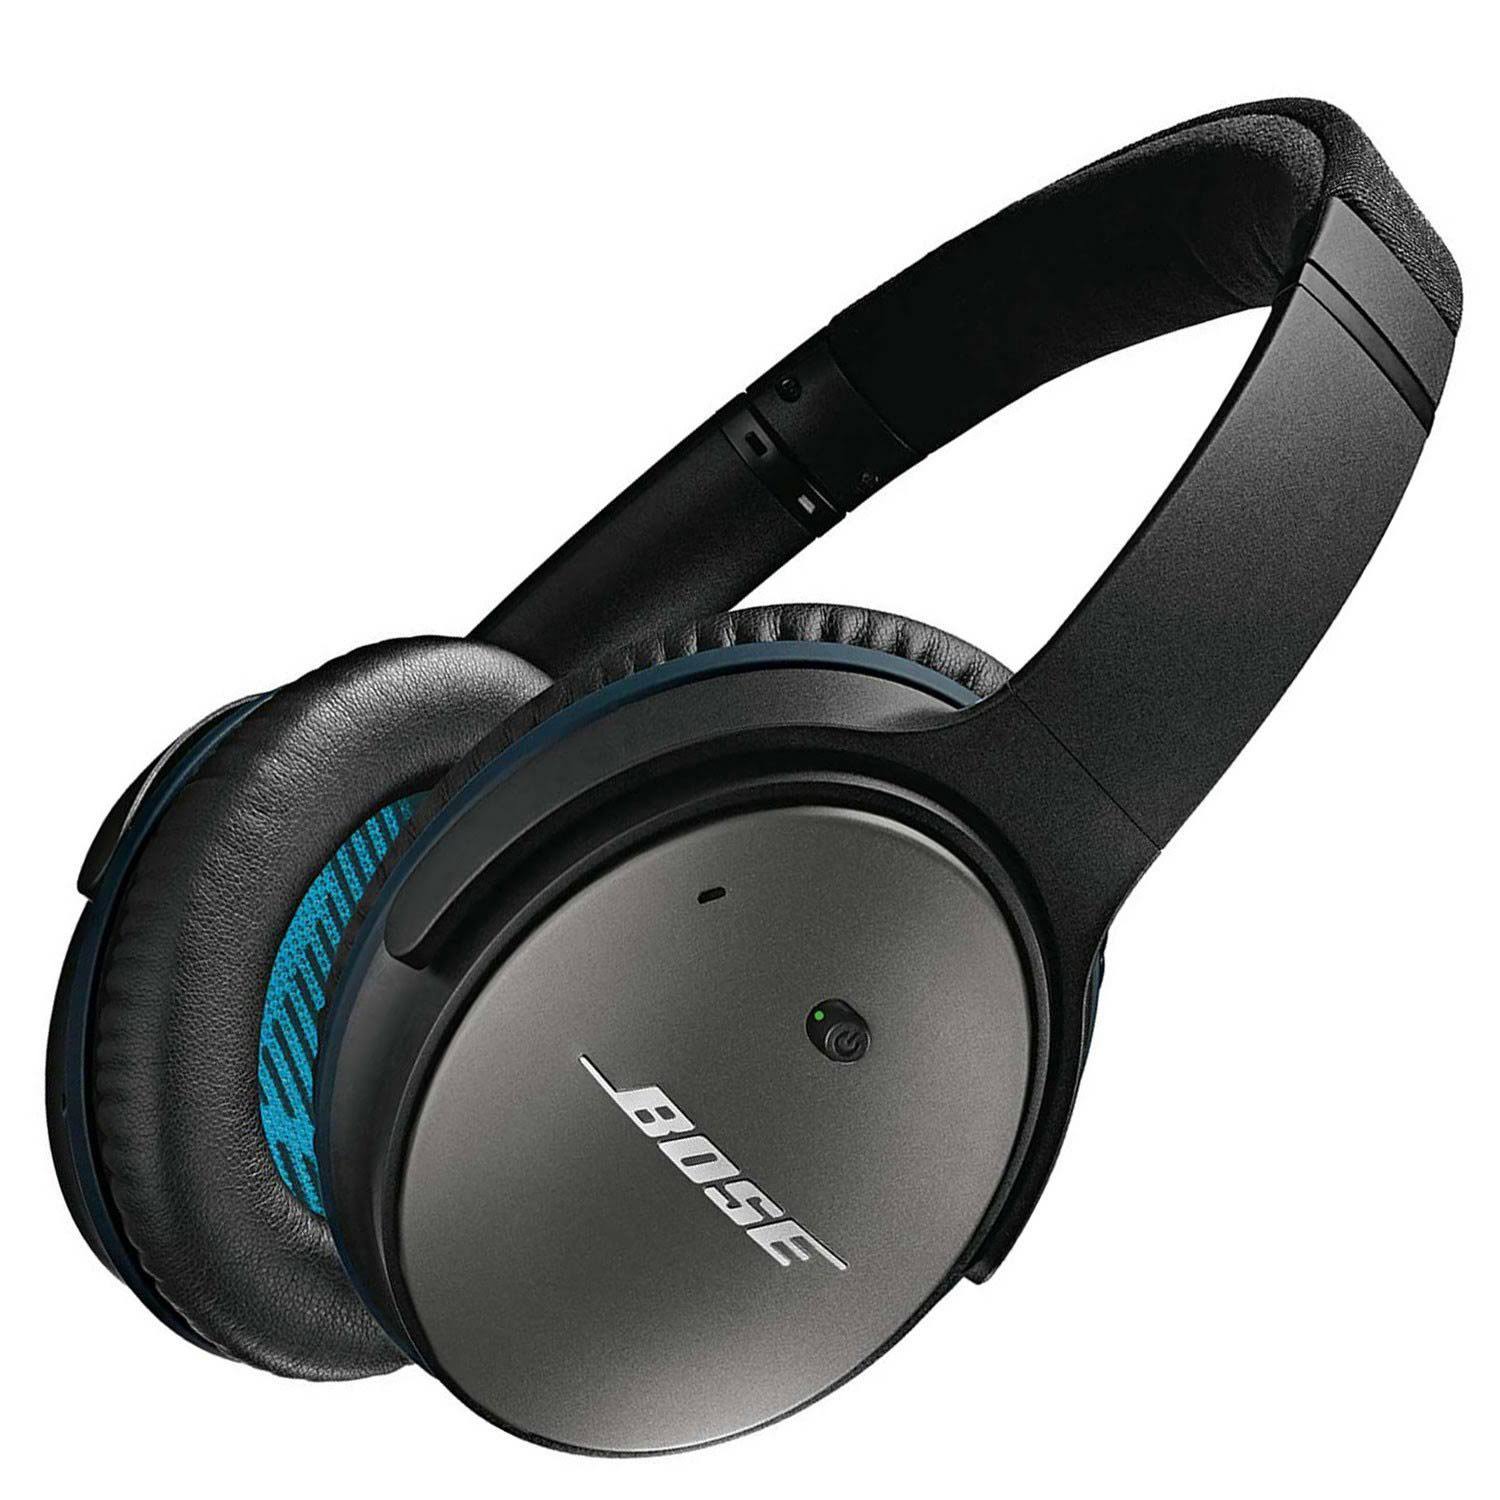 Bose Corporation Bose QuietComfort 25 Acoustic Noise Cancelling Headphones for Samsung and Android devices, Black (wired, 3.5mm)